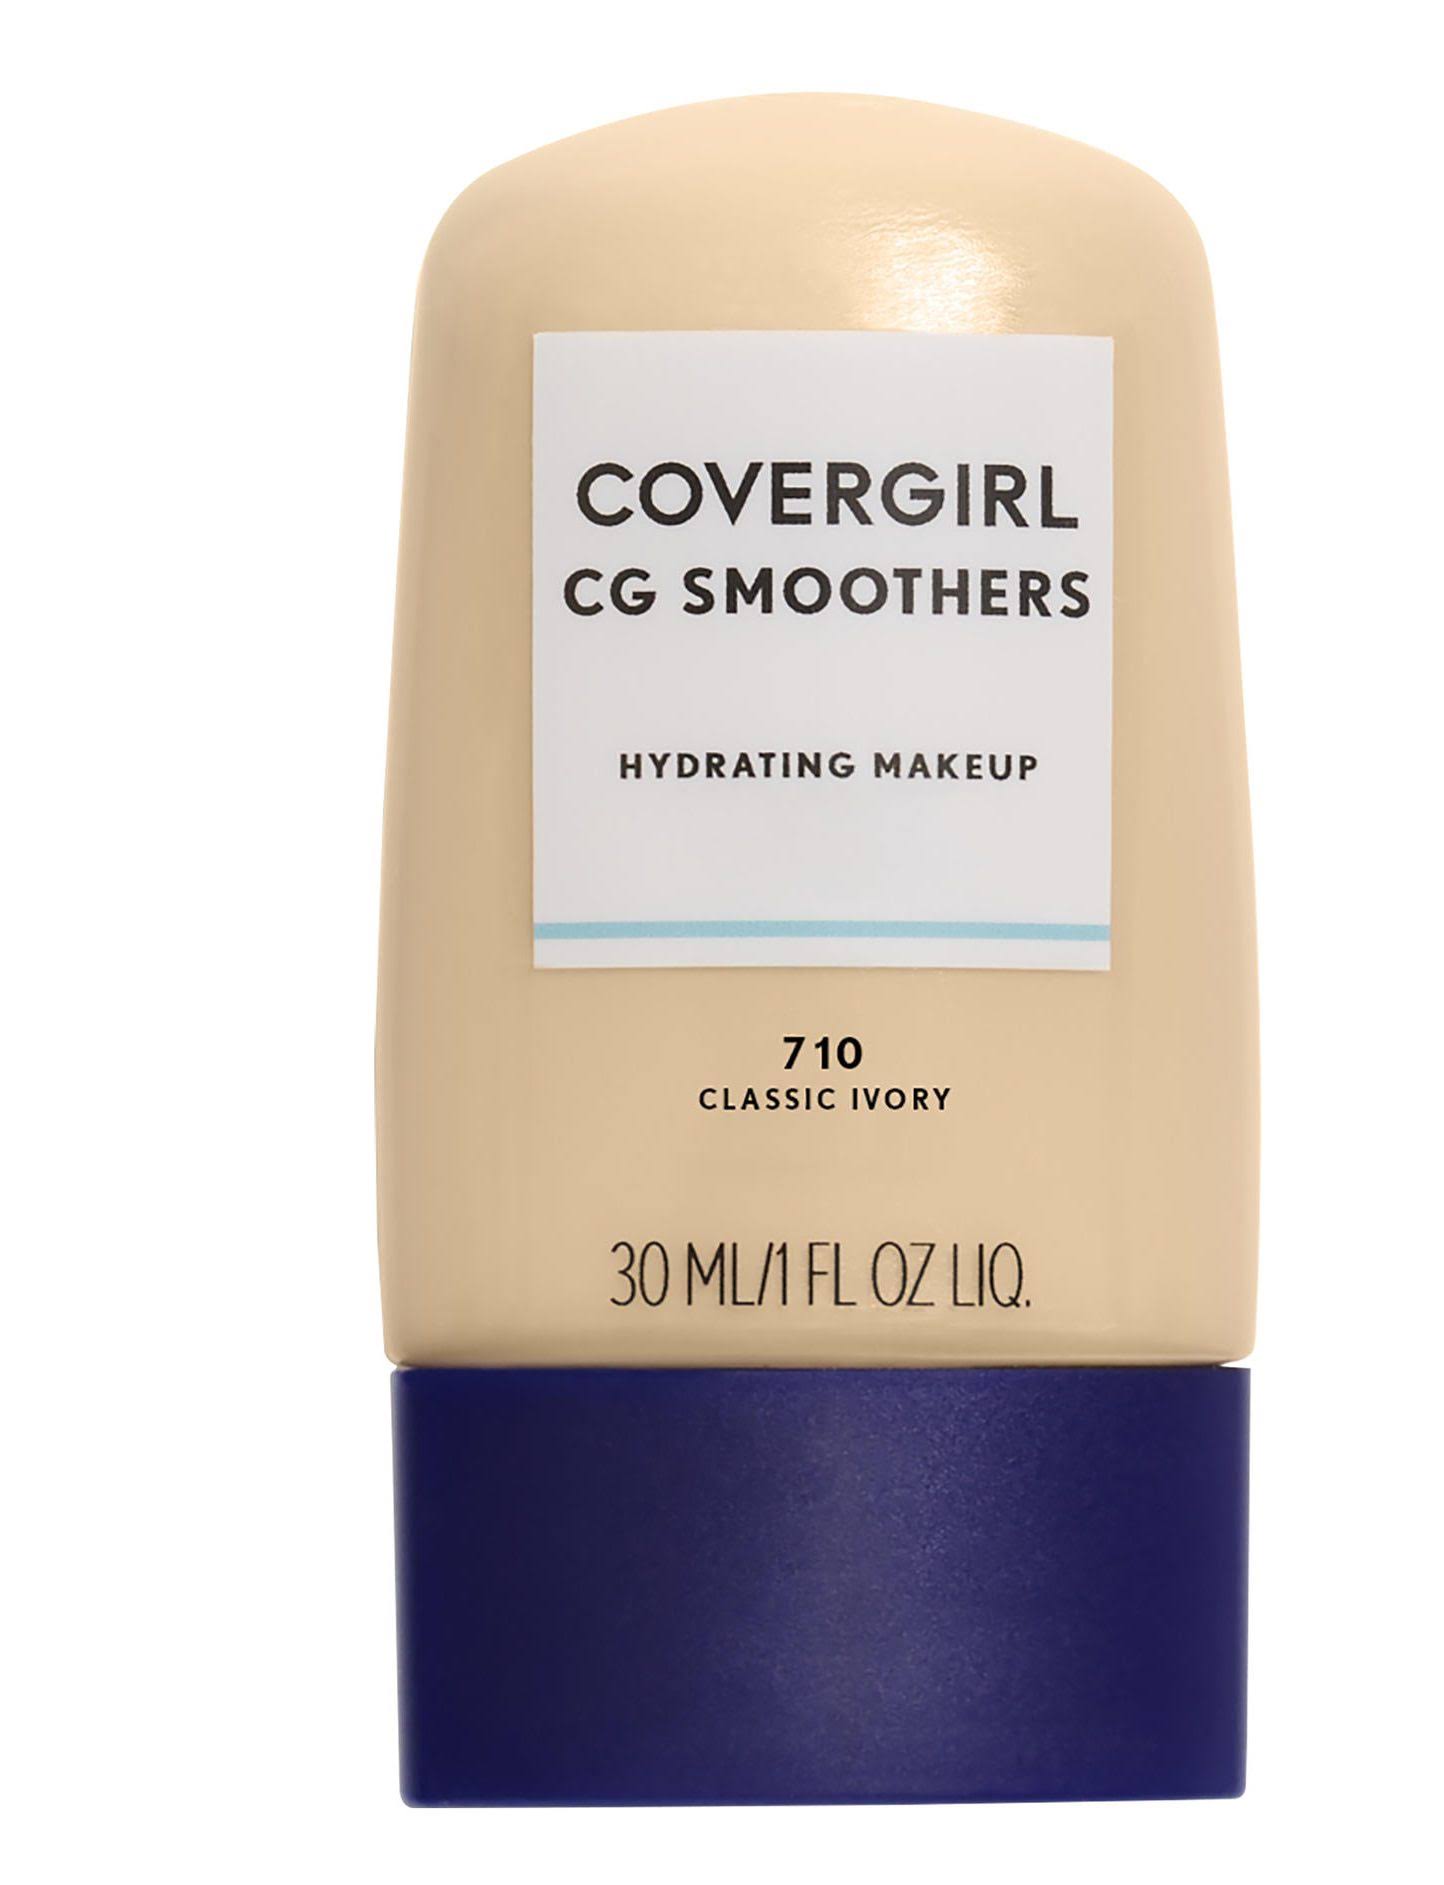 Covergirl Smoothers BB Cream - 710 Classic Ivory